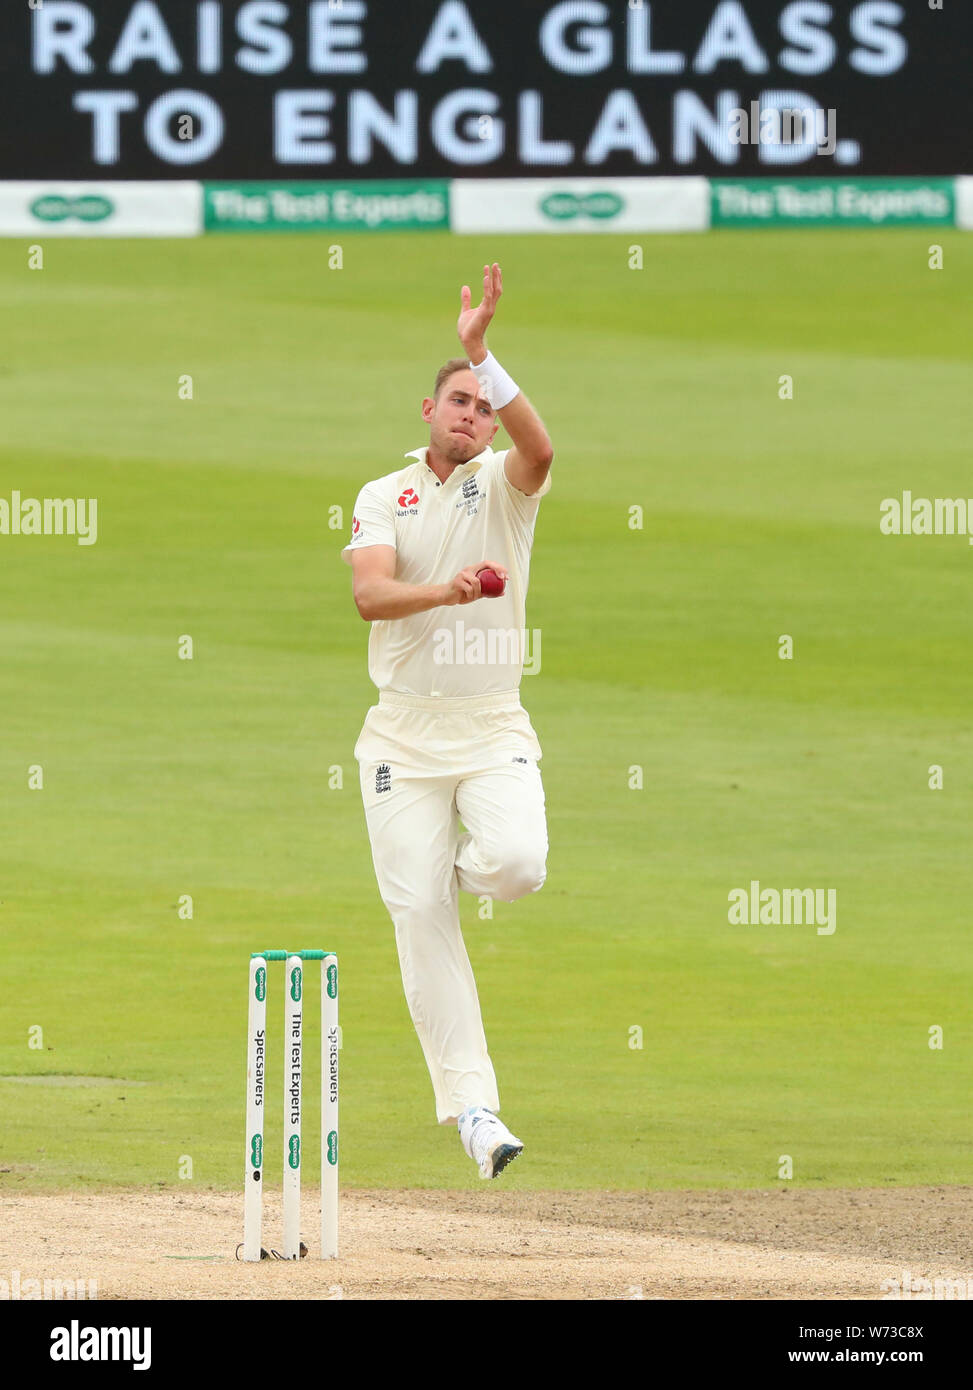 BIRMINGHAM, ENGLAND. 04 AUGUST 2019: Stuart Broad of England bowling during day 3 of the 1st Specsavers Ashes Test Match, at Edgbaston Cricket Ground, Birmingham, England. Stock Photo